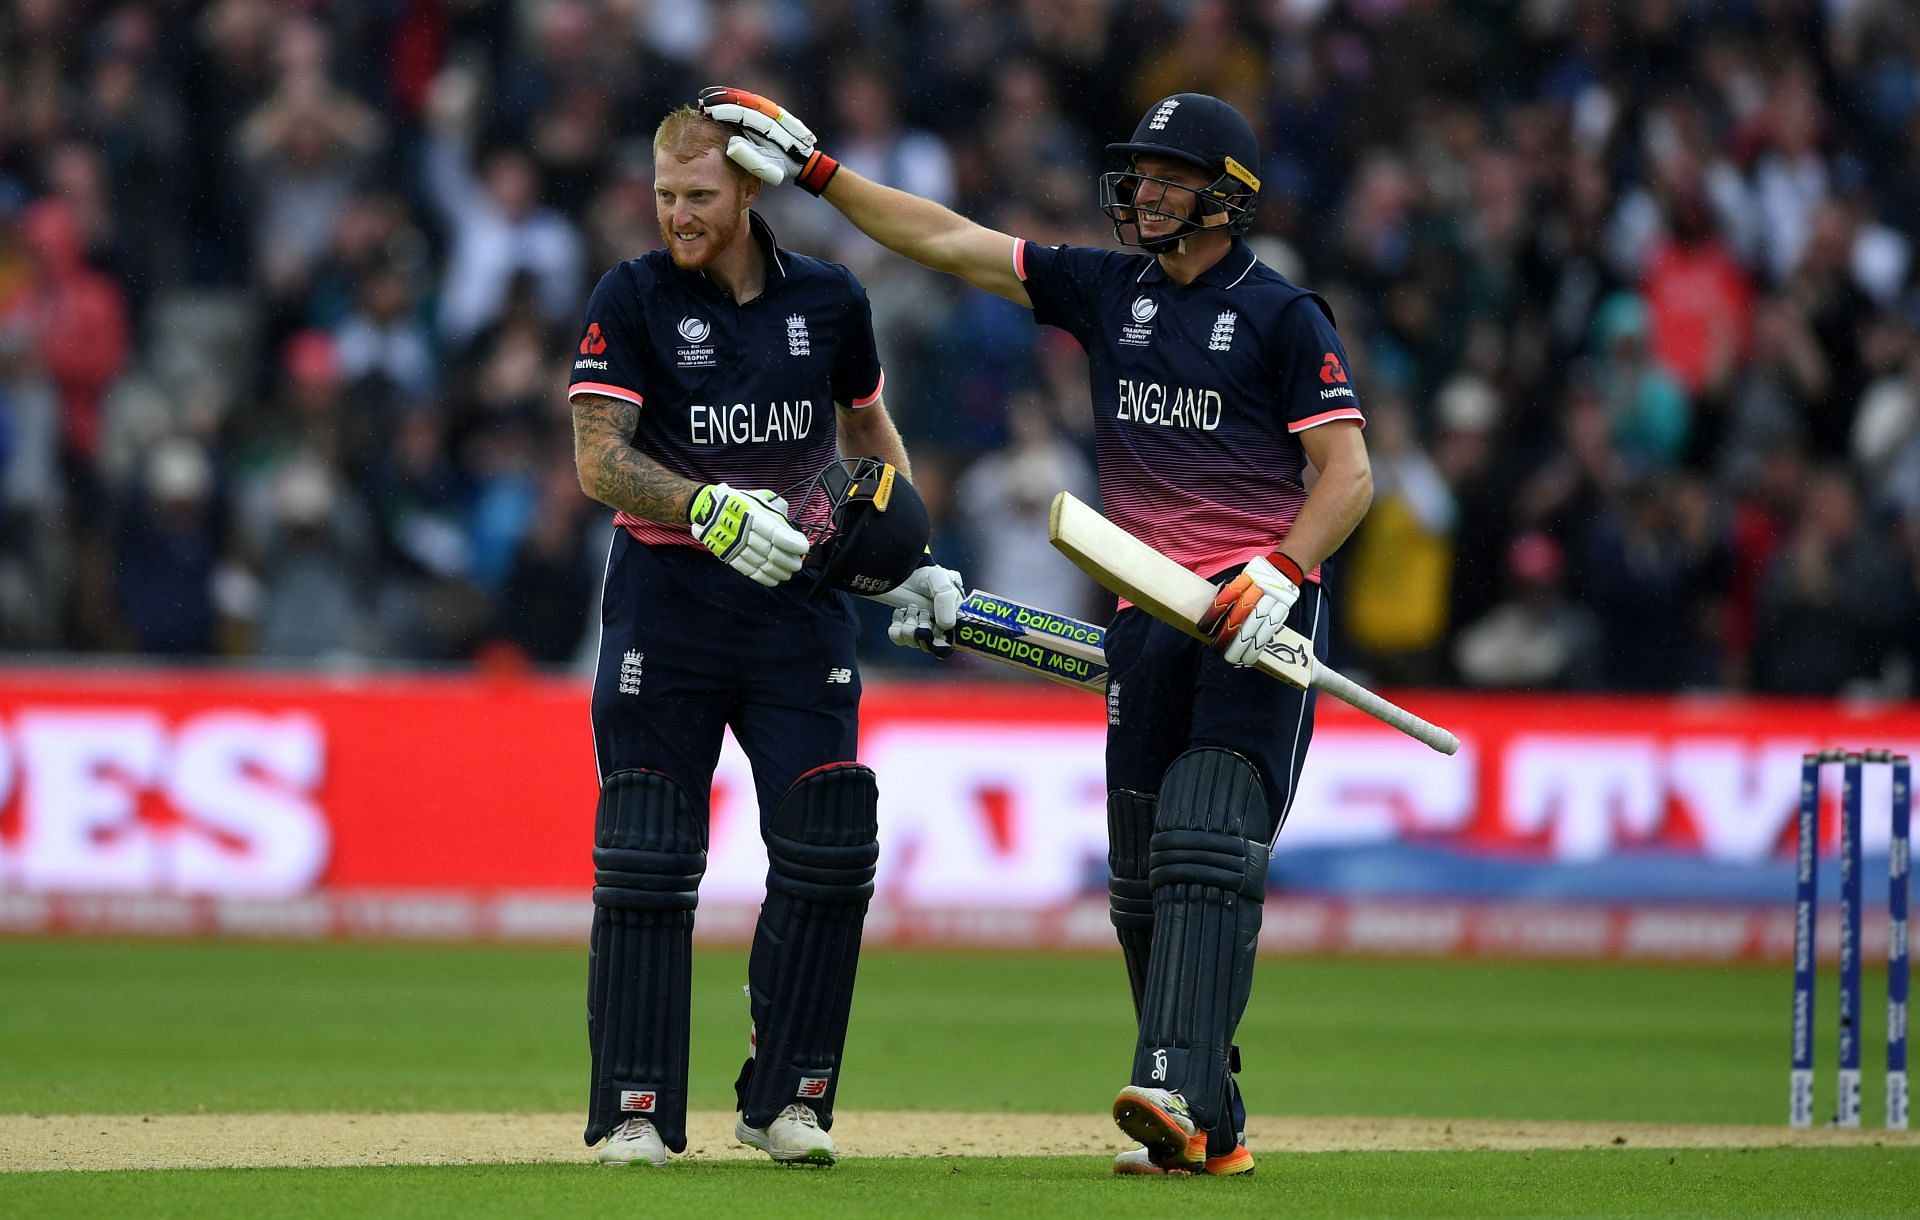 Ben Stokes was a key player for England in the 2017 Champions Trophy